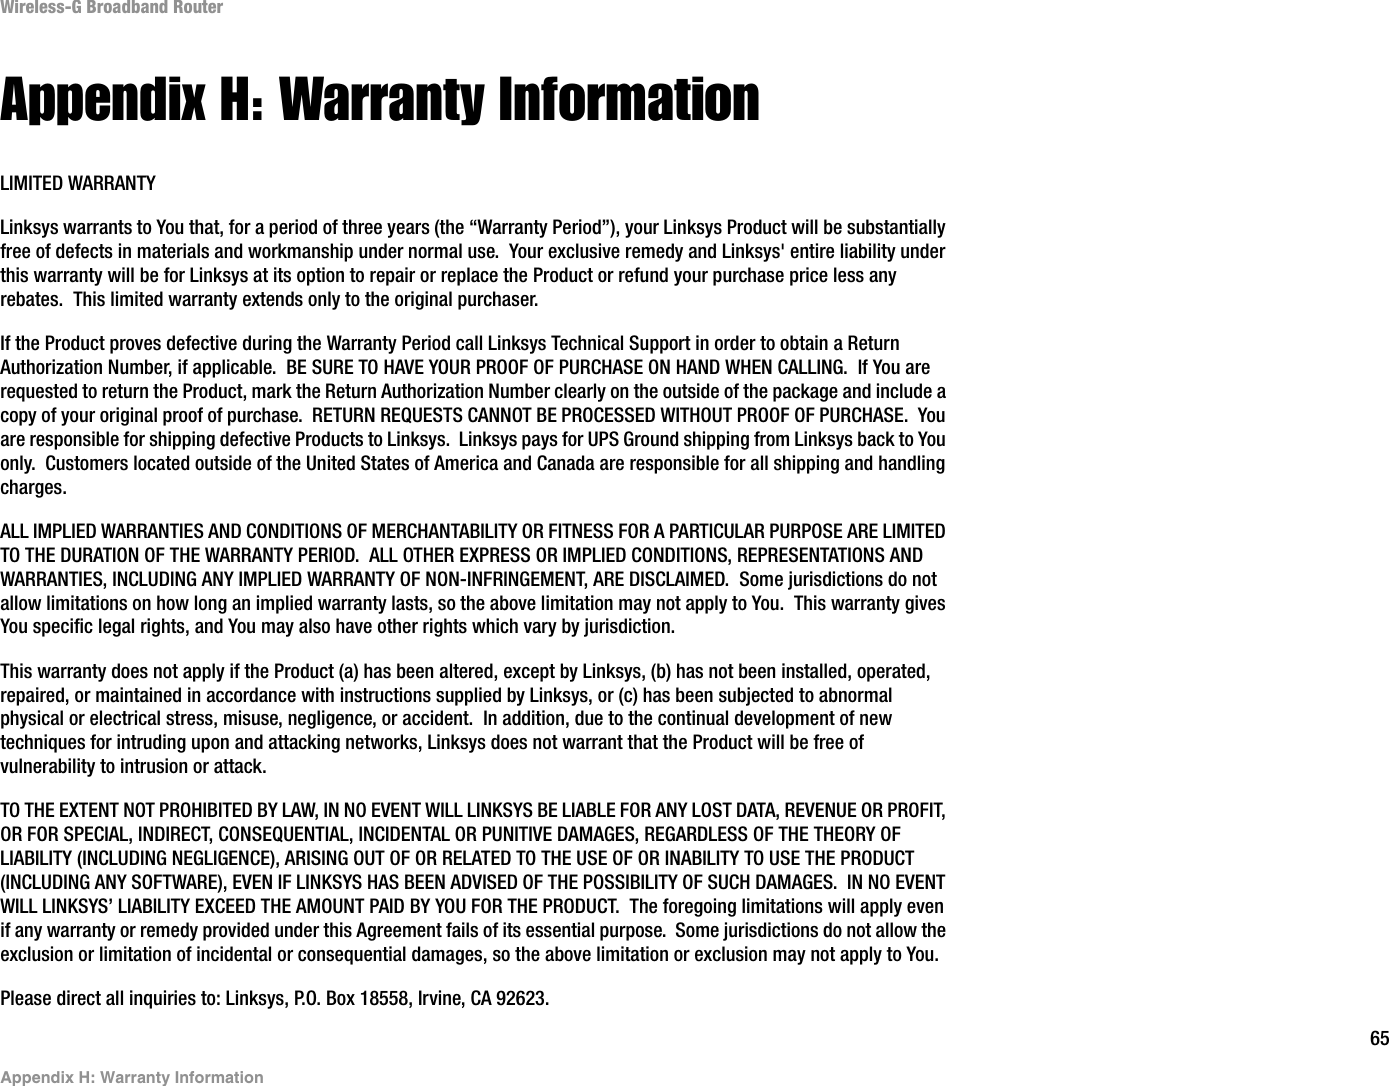 65Appendix H: Warranty InformationWireless-G Broadband RouterAppendix H: Warranty InformationLIMITED WARRANTYLinksys warrants to You that, for a period of three years (the “Warranty Period”), your Linksys Product will be substantially free of defects in materials and workmanship under normal use.  Your exclusive remedy and Linksys&apos; entire liability under this warranty will be for Linksys at its option to repair or replace the Product or refund your purchase price less any rebates.  This limited warranty extends only to the original purchaser.  If the Product proves defective during the Warranty Period call Linksys Technical Support in order to obtain a Return Authorization Number, if applicable.  BE SURE TO HAVE YOUR PROOF OF PURCHASE ON HAND WHEN CALLING.  If You are requested to return the Product, mark the Return Authorization Number clearly on the outside of the package and include a copy of your original proof of purchase.  RETURN REQUESTS CANNOT BE PROCESSED WITHOUT PROOF OF PURCHASE.  You are responsible for shipping defective Products to Linksys.  Linksys pays for UPS Ground shipping from Linksys back to You only.  Customers located outside of the United States of America and Canada are responsible for all shipping and handling charges. ALL IMPLIED WARRANTIES AND CONDITIONS OF MERCHANTABILITY OR FITNESS FOR A PARTICULAR PURPOSE ARE LIMITED TO THE DURATION OF THE WARRANTY PERIOD.  ALL OTHER EXPRESS OR IMPLIED CONDITIONS, REPRESENTATIONS AND WARRANTIES, INCLUDING ANY IMPLIED WARRANTY OF NON-INFRINGEMENT, ARE DISCLAIMED.  Some jurisdictions do not allow limitations on how long an implied warranty lasts, so the above limitation may not apply to You.  This warranty gives You specific legal rights, and You may also have other rights which vary by jurisdiction.This warranty does not apply if the Product (a) has been altered, except by Linksys, (b) has not been installed, operated, repaired, or maintained in accordance with instructions supplied by Linksys, or (c) has been subjected to abnormal physical or electrical stress, misuse, negligence, or accident.  In addition, due to the continual development of new techniques for intruding upon and attacking networks, Linksys does not warrant that the Product will be free of vulnerability to intrusion or attack.TO THE EXTENT NOT PROHIBITED BY LAW, IN NO EVENT WILL LINKSYS BE LIABLE FOR ANY LOST DATA, REVENUE OR PROFIT, OR FOR SPECIAL, INDIRECT, CONSEQUENTIAL, INCIDENTAL OR PUNITIVE DAMAGES, REGARDLESS OF THE THEORY OF LIABILITY (INCLUDING NEGLIGENCE), ARISING OUT OF OR RELATED TO THE USE OF OR INABILITY TO USE THE PRODUCT (INCLUDING ANY SOFTWARE), EVEN IF LINKSYS HAS BEEN ADVISED OF THE POSSIBILITY OF SUCH DAMAGES.  IN NO EVENT WILL LINKSYS’ LIABILITY EXCEED THE AMOUNT PAID BY YOU FOR THE PRODUCT.  The foregoing limitations will apply even if any warranty or remedy provided under this Agreement fails of its essential purpose.  Some jurisdictions do not allow the exclusion or limitation of incidental or consequential damages, so the above limitation or exclusion may not apply to You.Please direct all inquiries to: Linksys, P.O. Box 18558, Irvine, CA 92623.